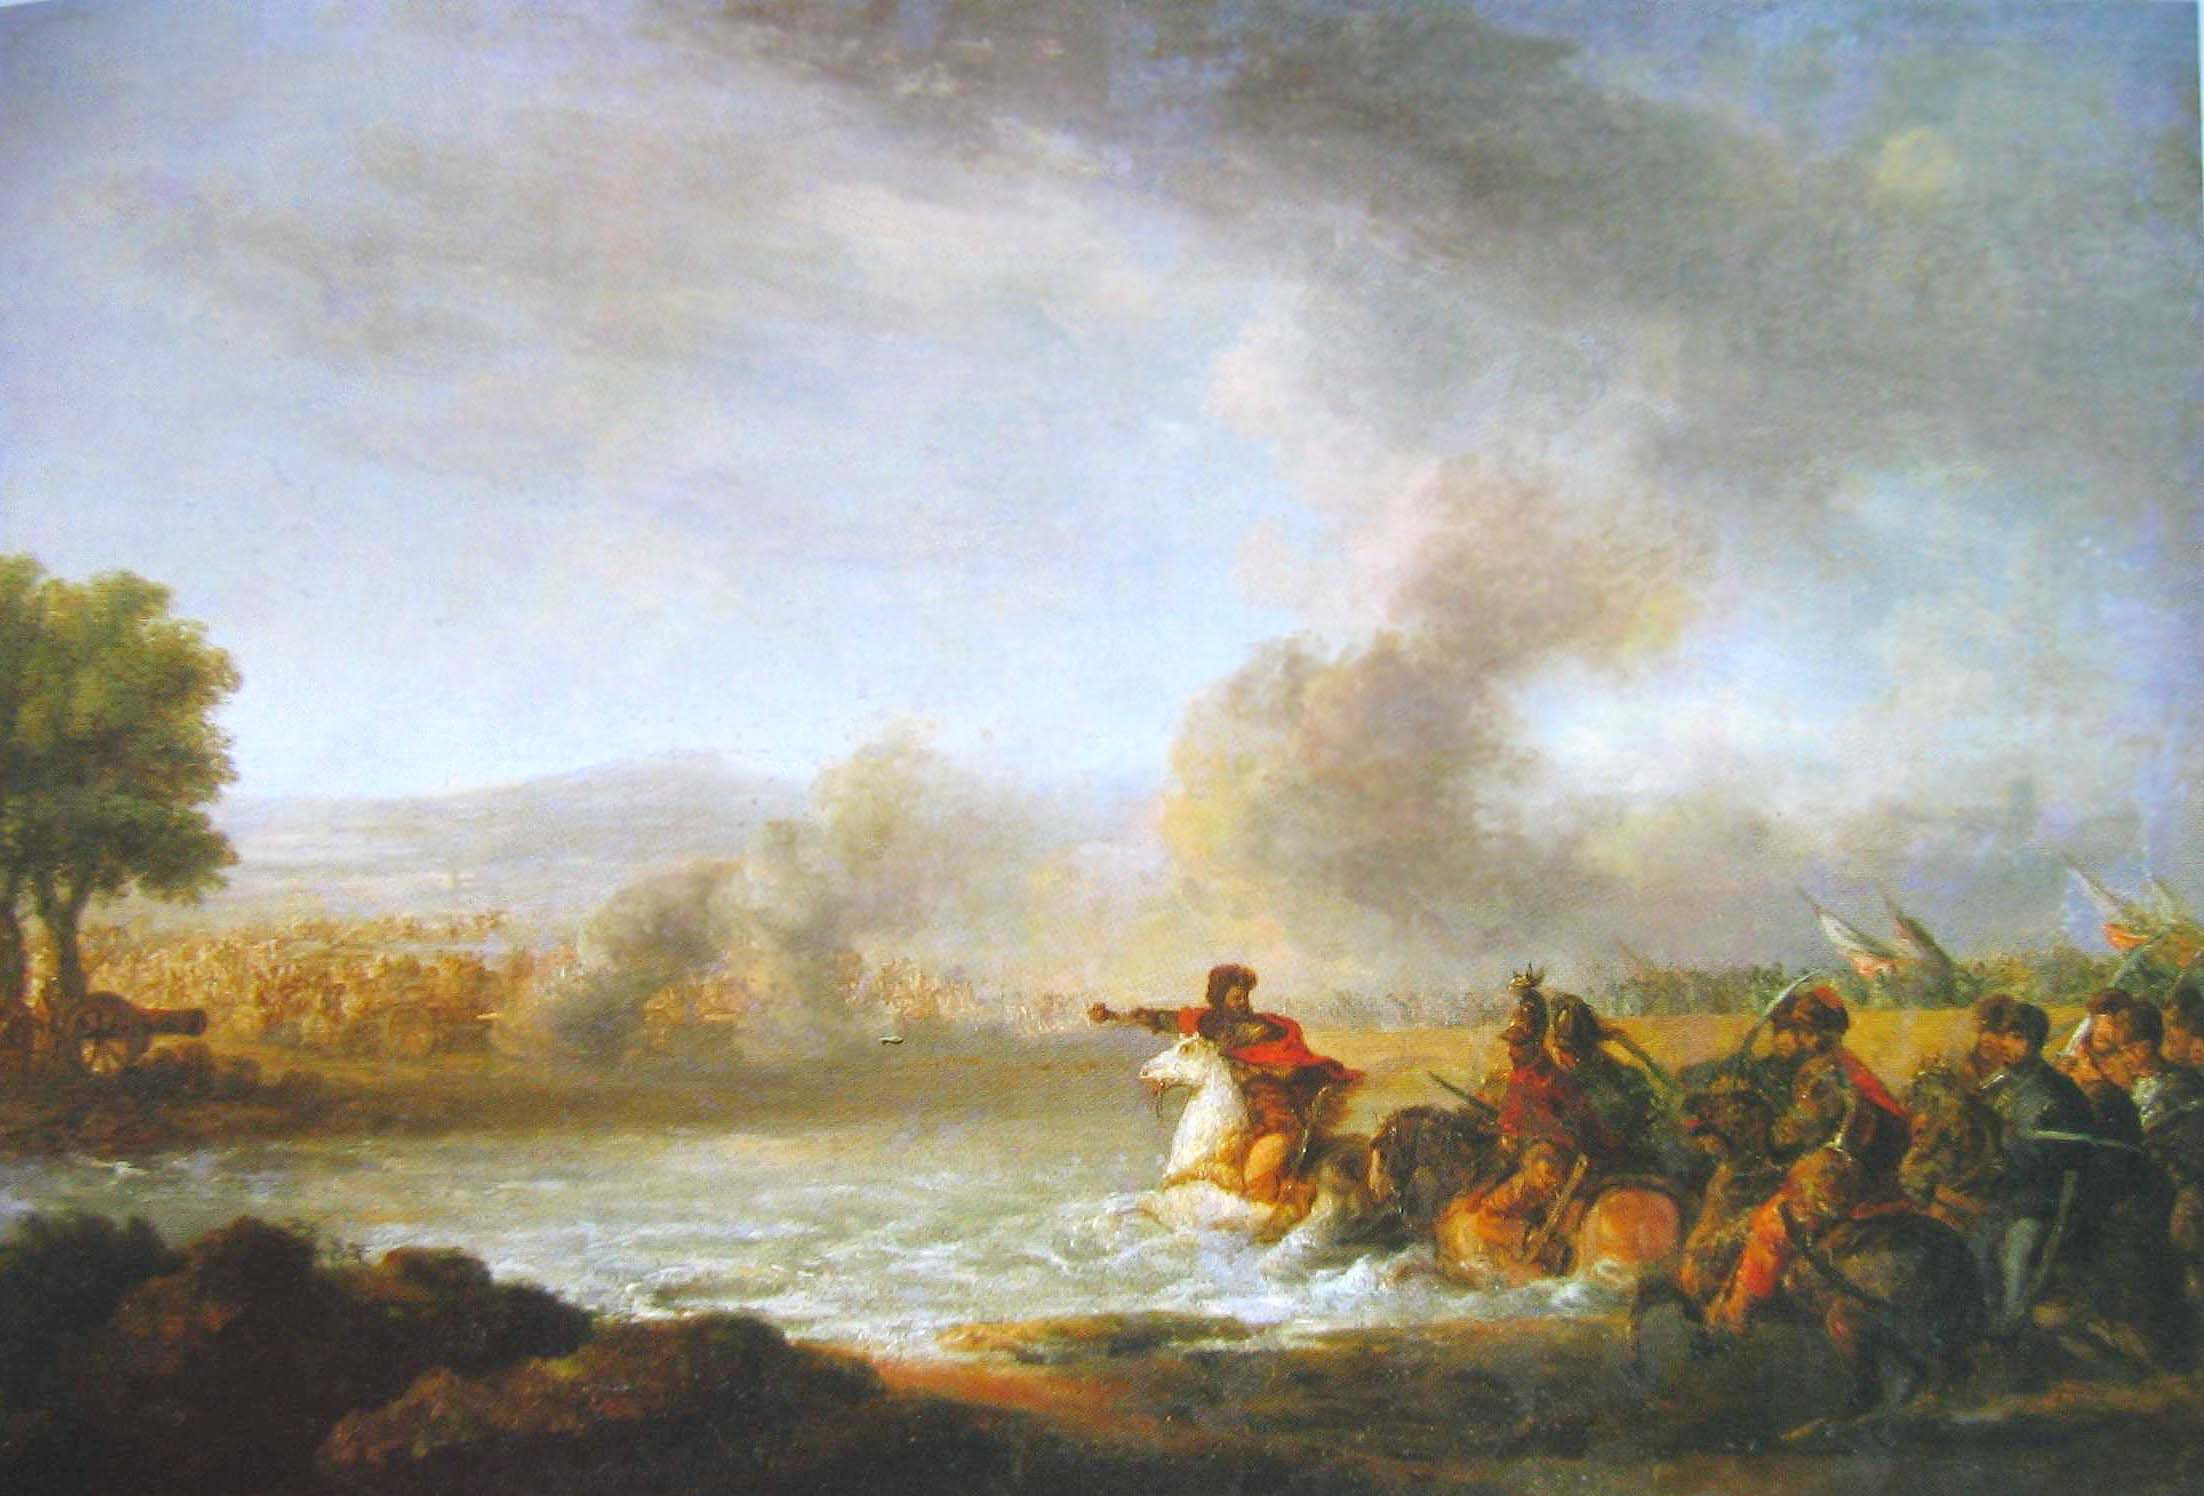 Stefan Czarniecki during the Battle of Warka, F. Smuglewicz, oil on canvas, 18th/19th centuries, courtesy of the National Museum in Wrocław